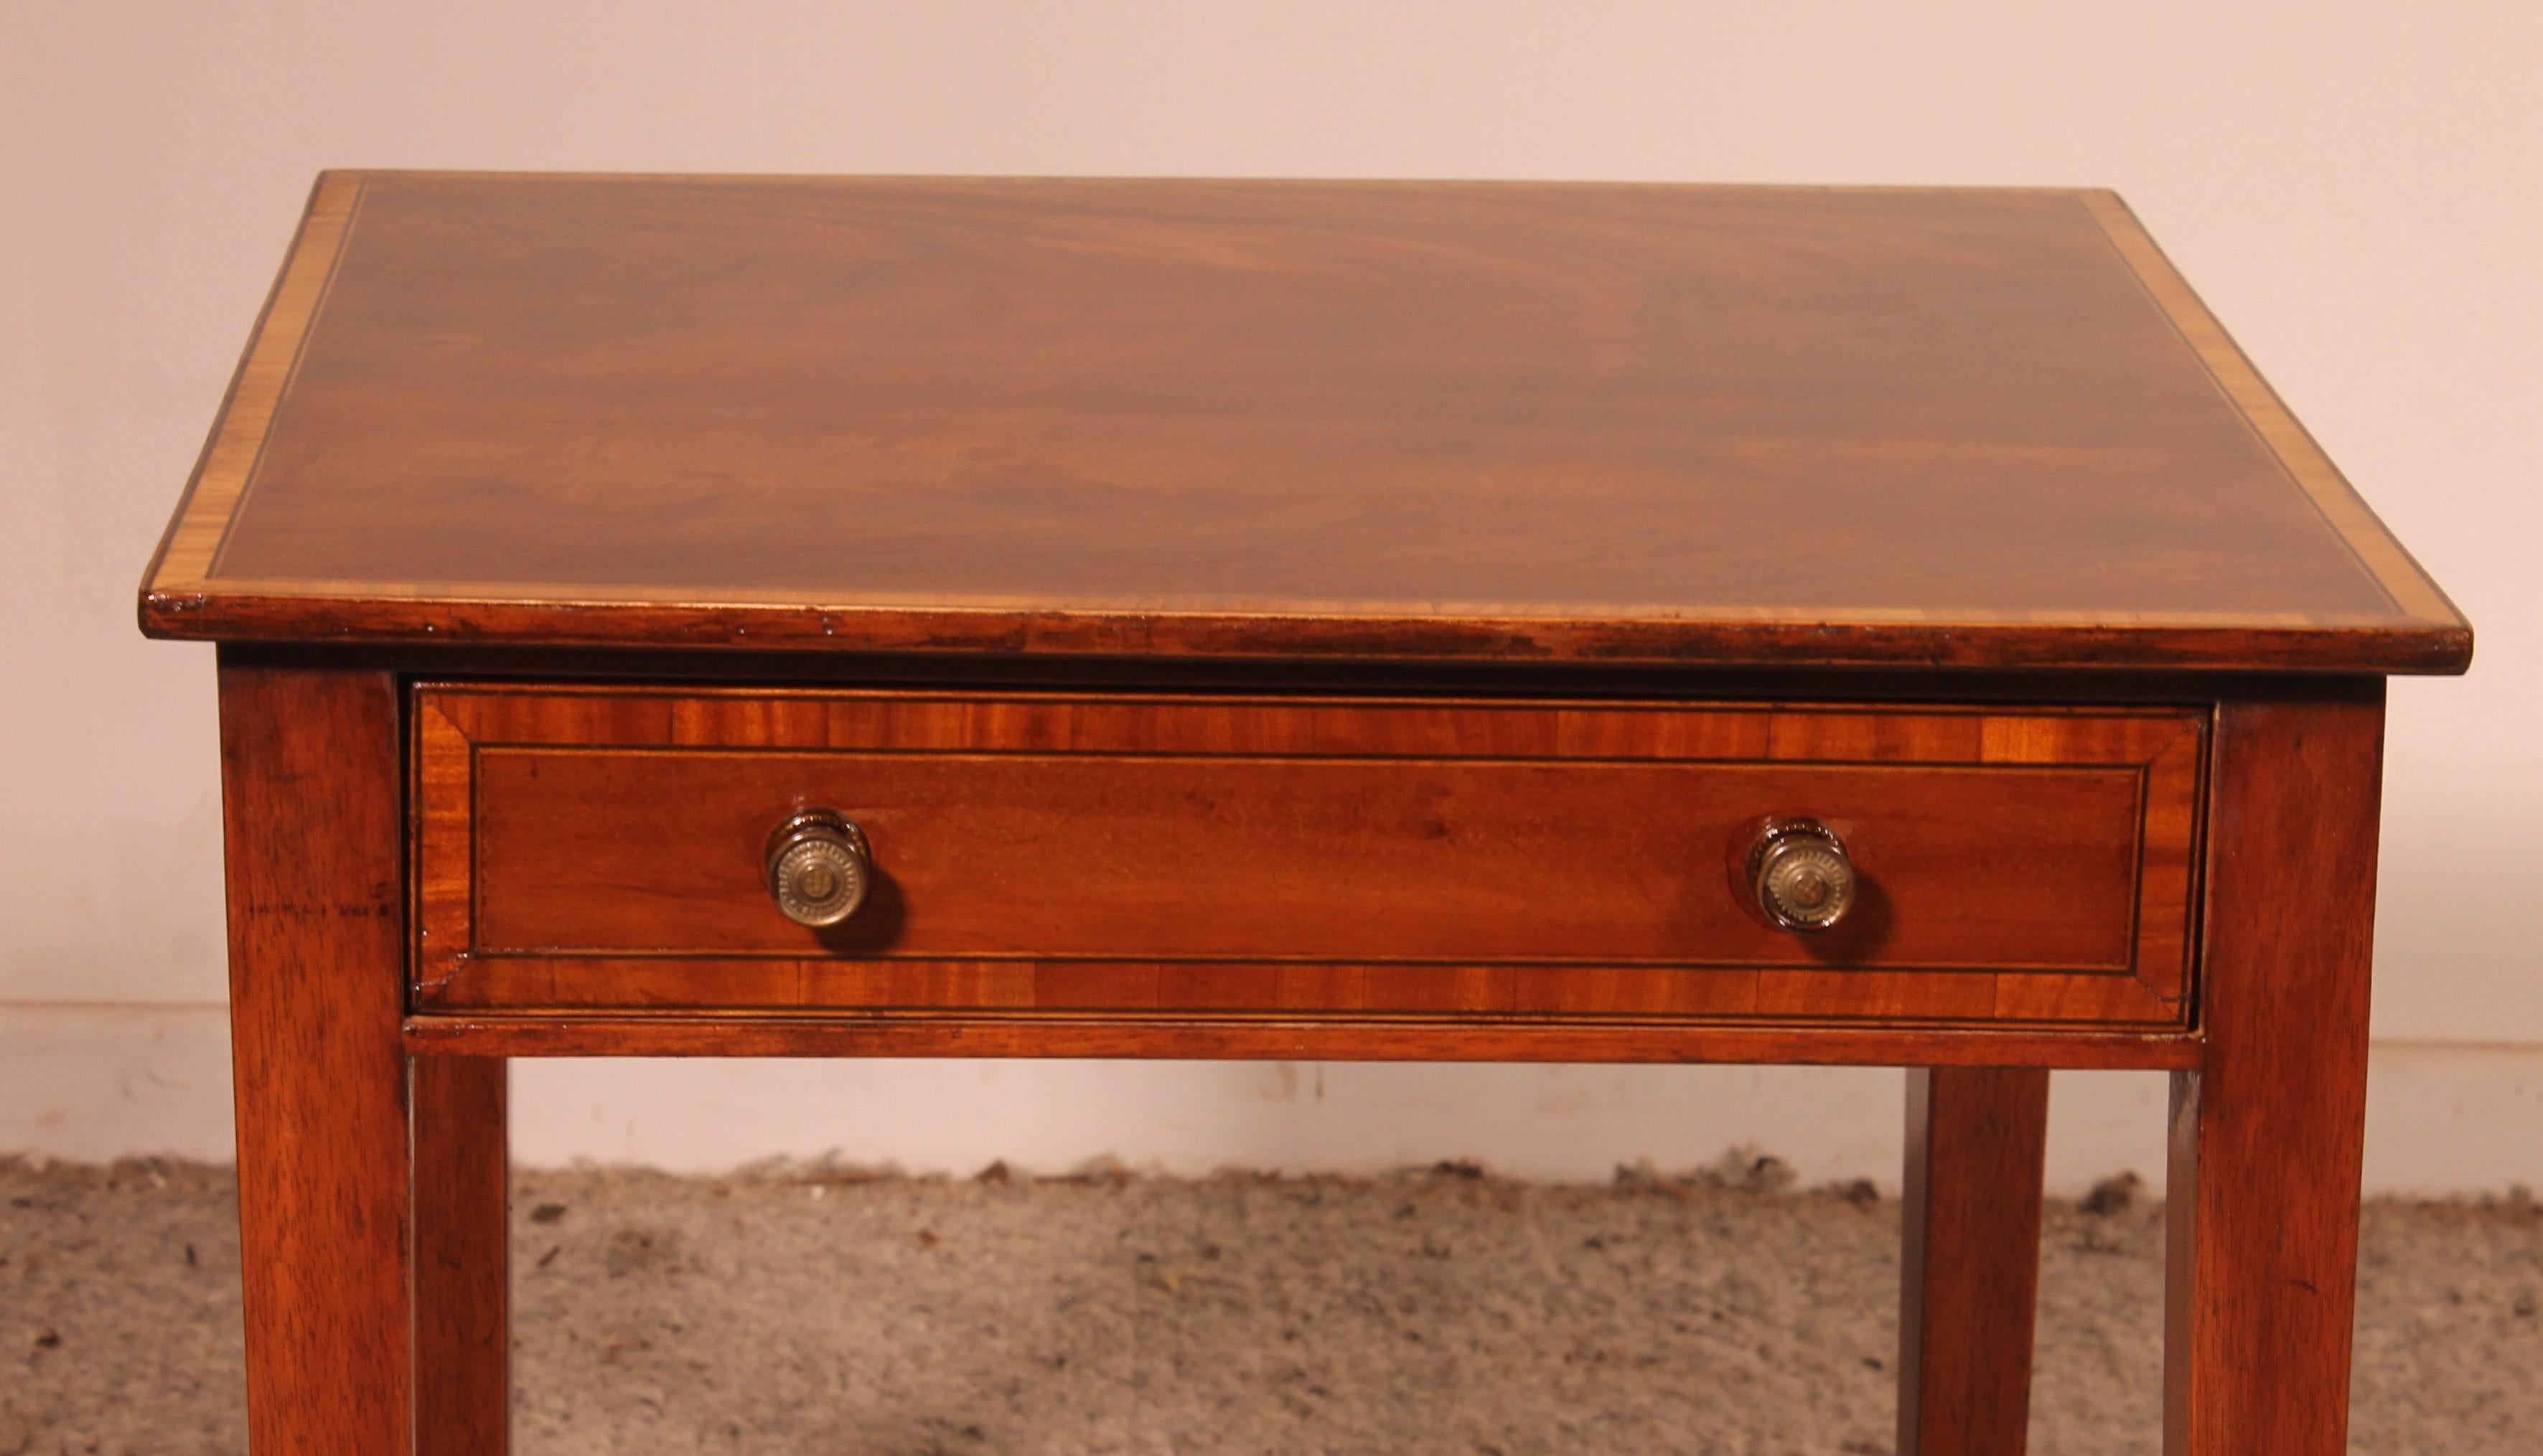 Regency Pair Of Mahogany Bedside Tables From The Early 19th Century For Sale